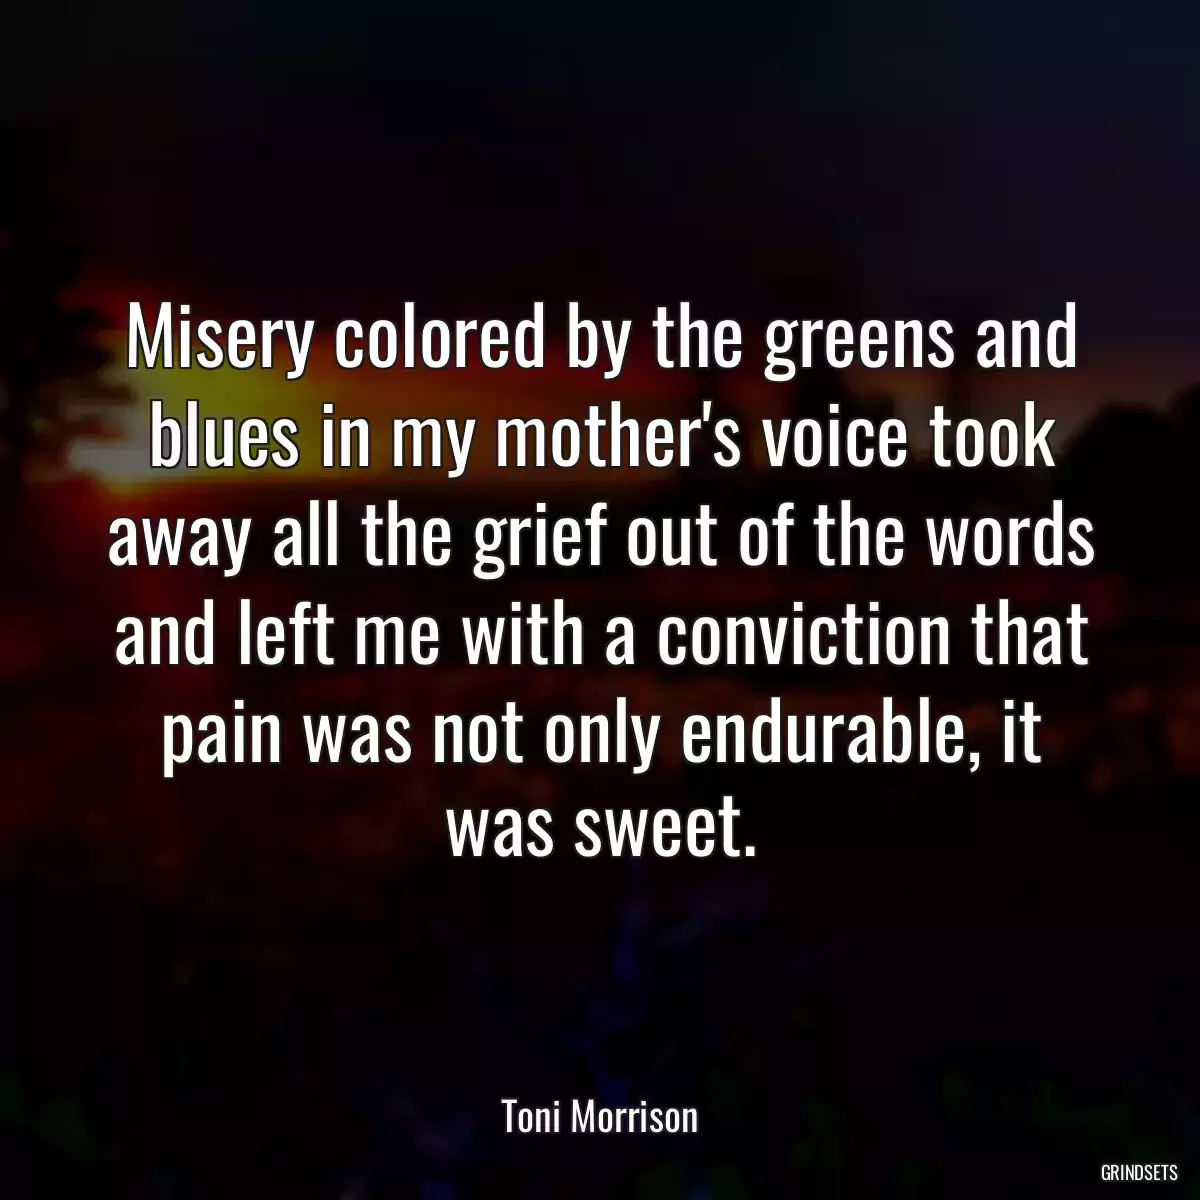 Misery colored by the greens and blues in my mother\'s voice took away all the grief out of the words and left me with a conviction that pain was not only endurable, it was sweet.